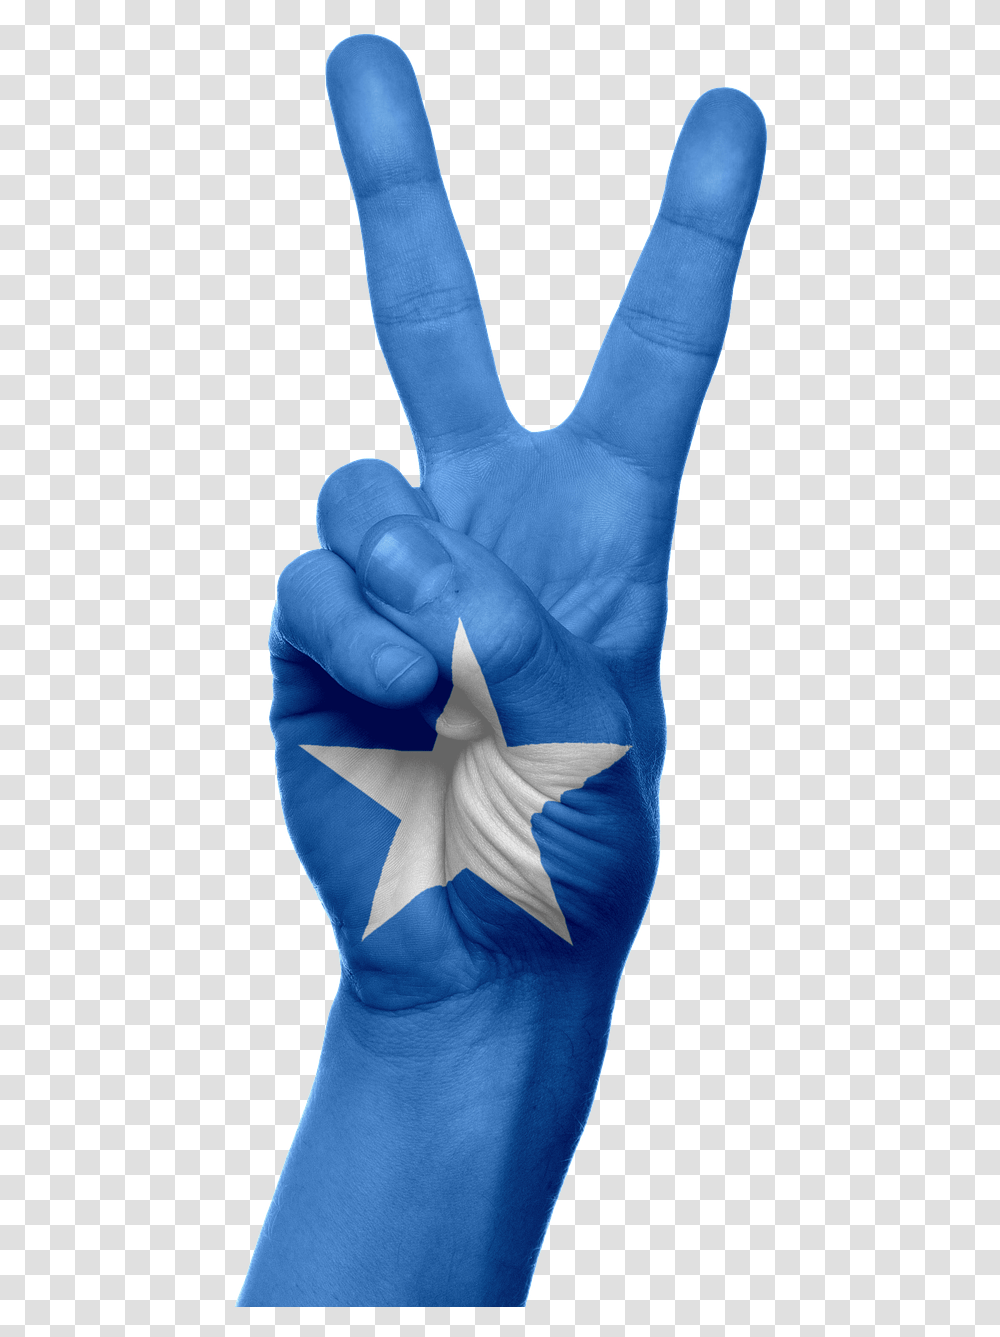 Signfree Pictures Free Photos Free Images Royalty Somalia Flag Emoji, Hand, Finger, Wrist, Person Transparent Png